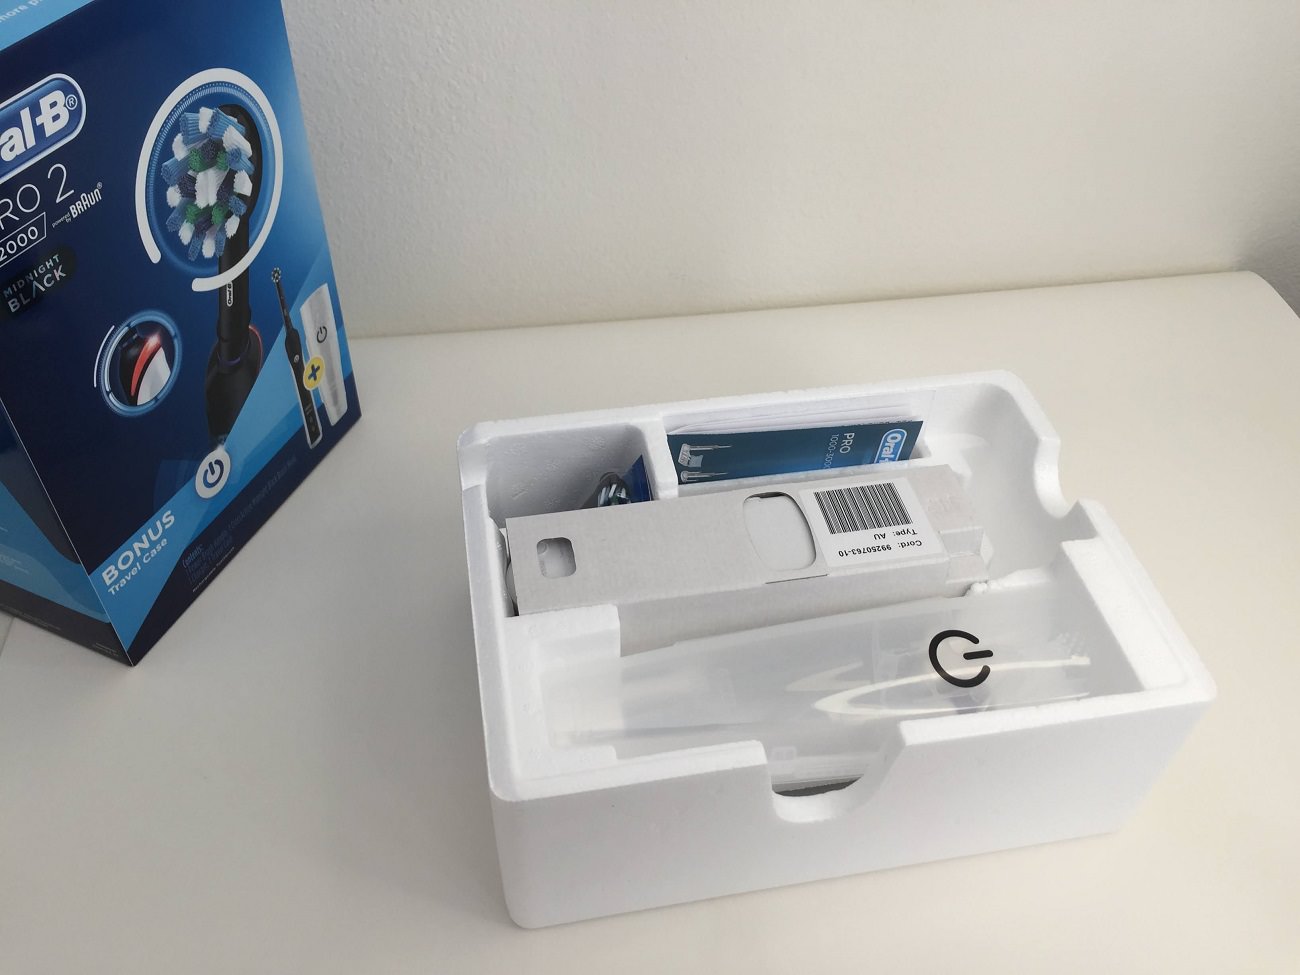 The Oral-B packaging for the Pro 2000 is secure